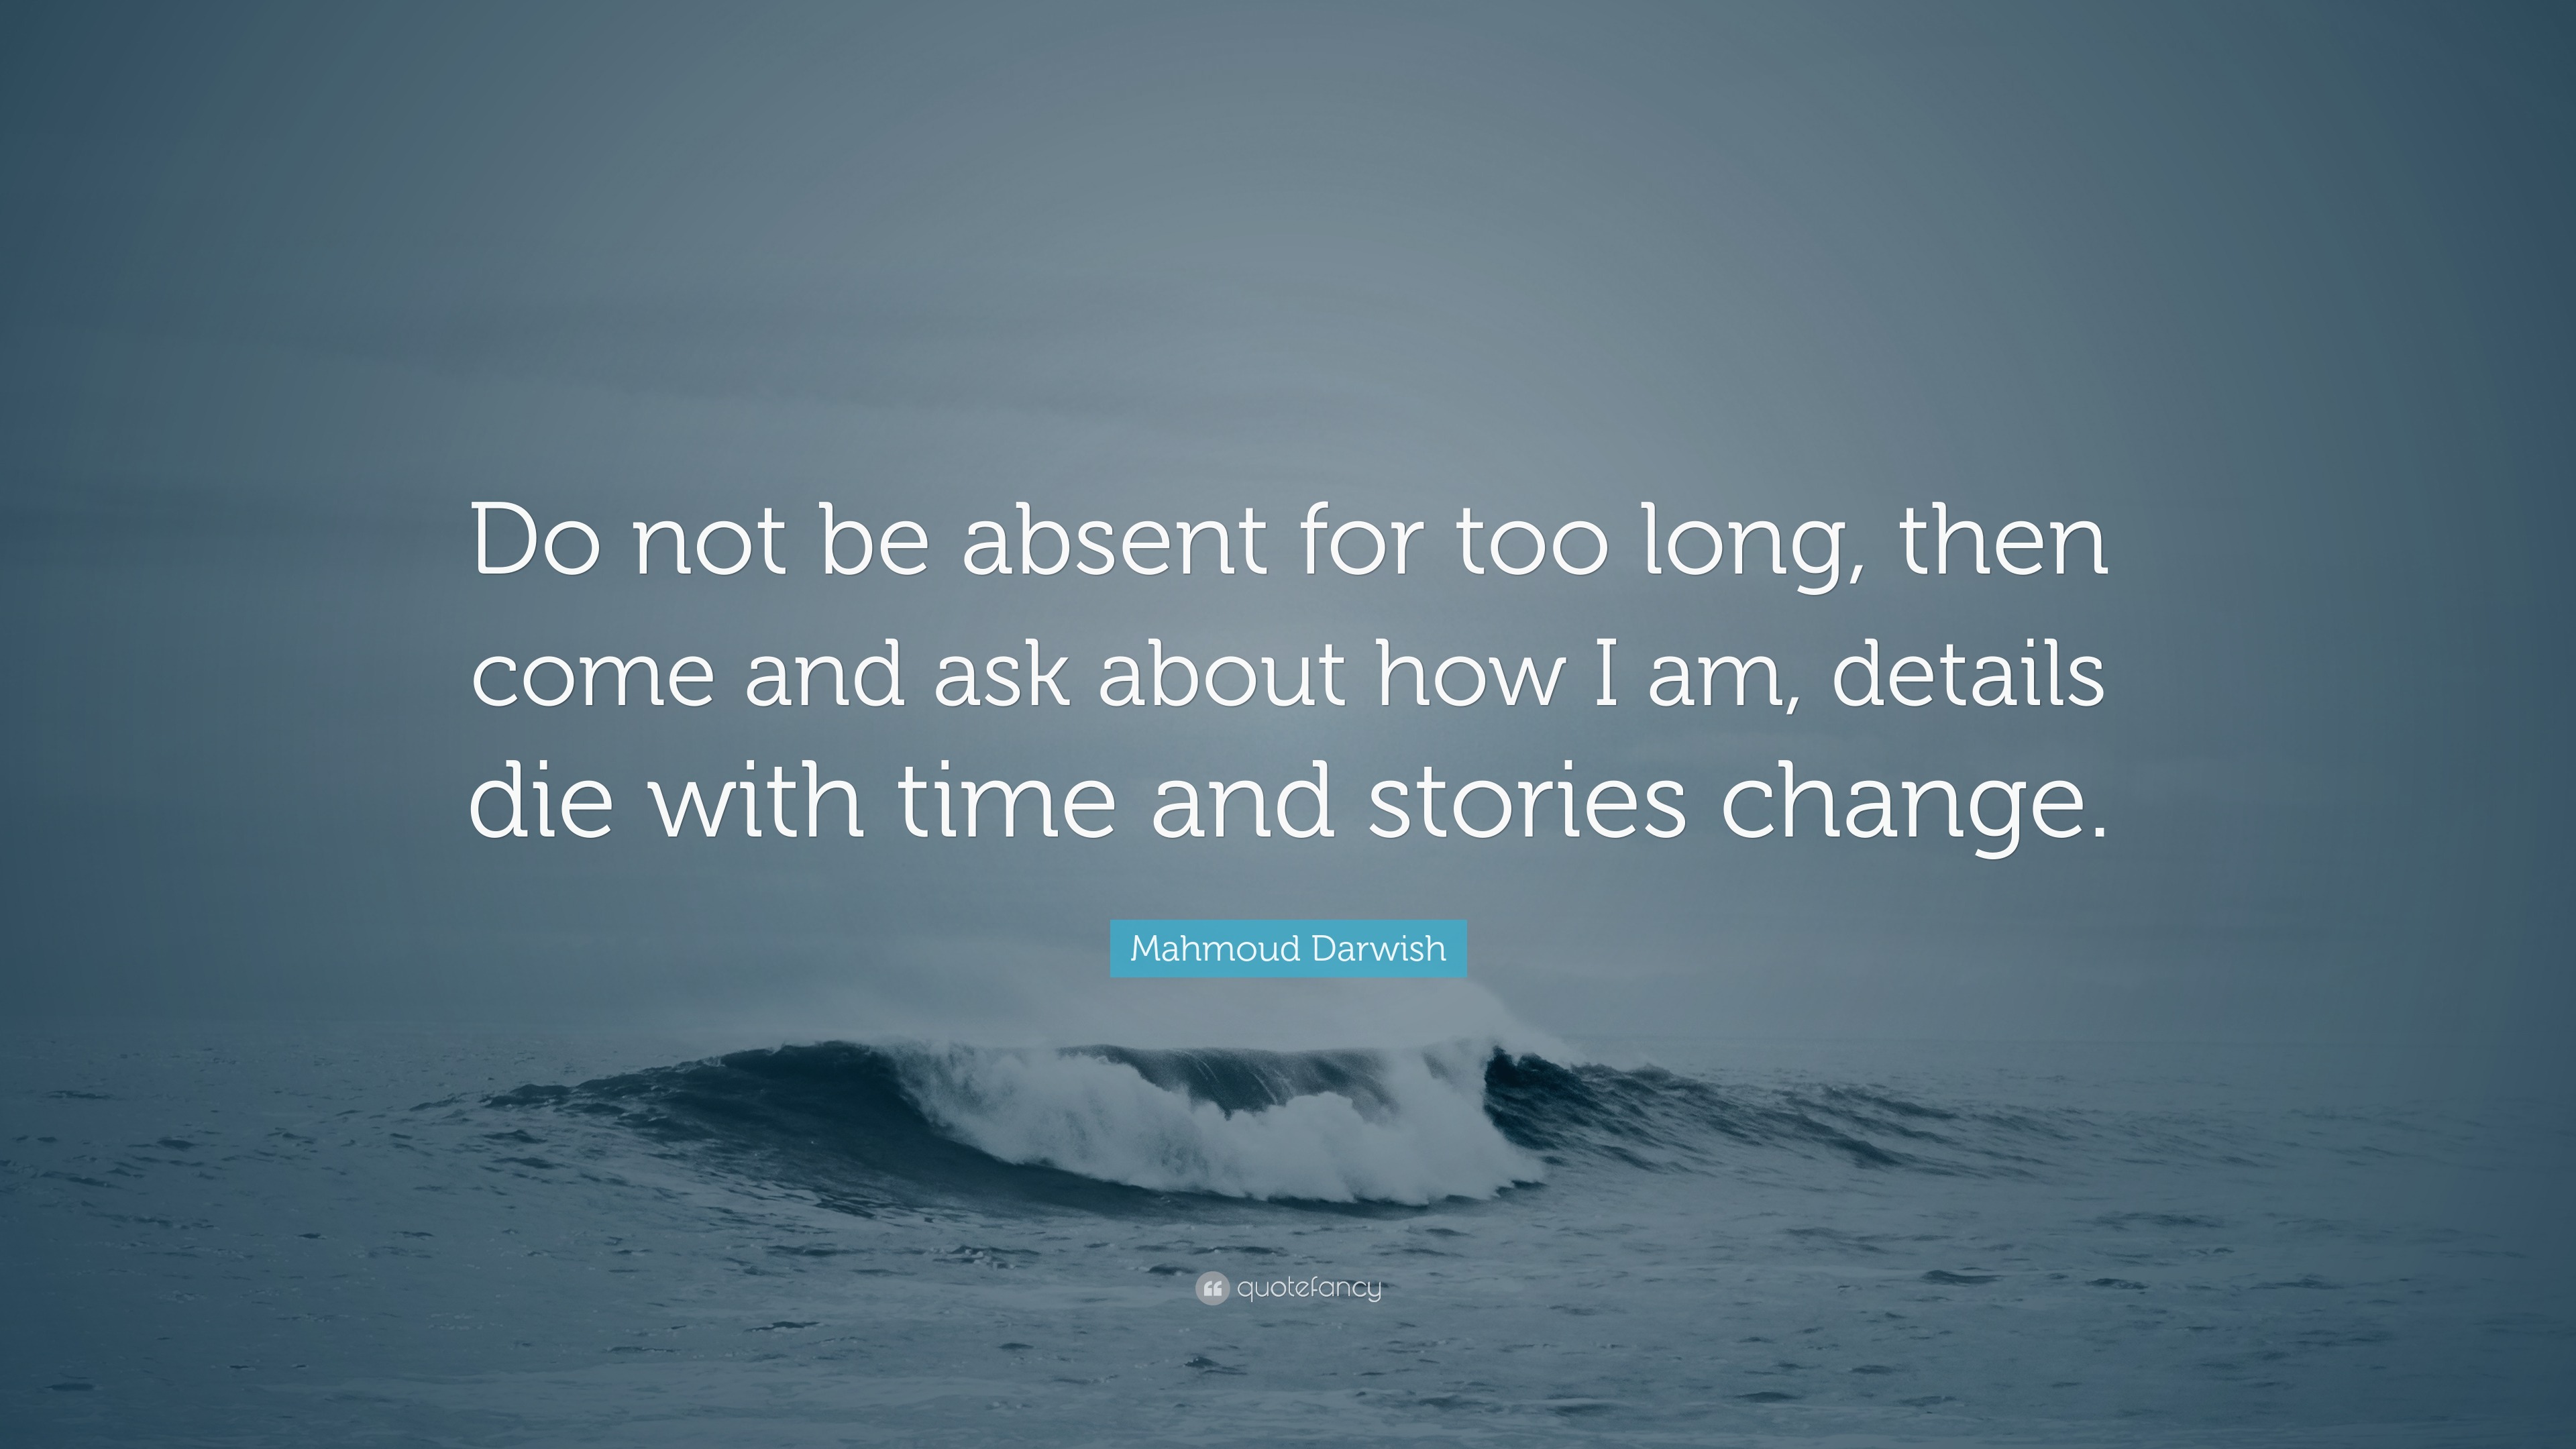 Mahmoud Darwish Quote: “Do not be absent for too long, then come and ...